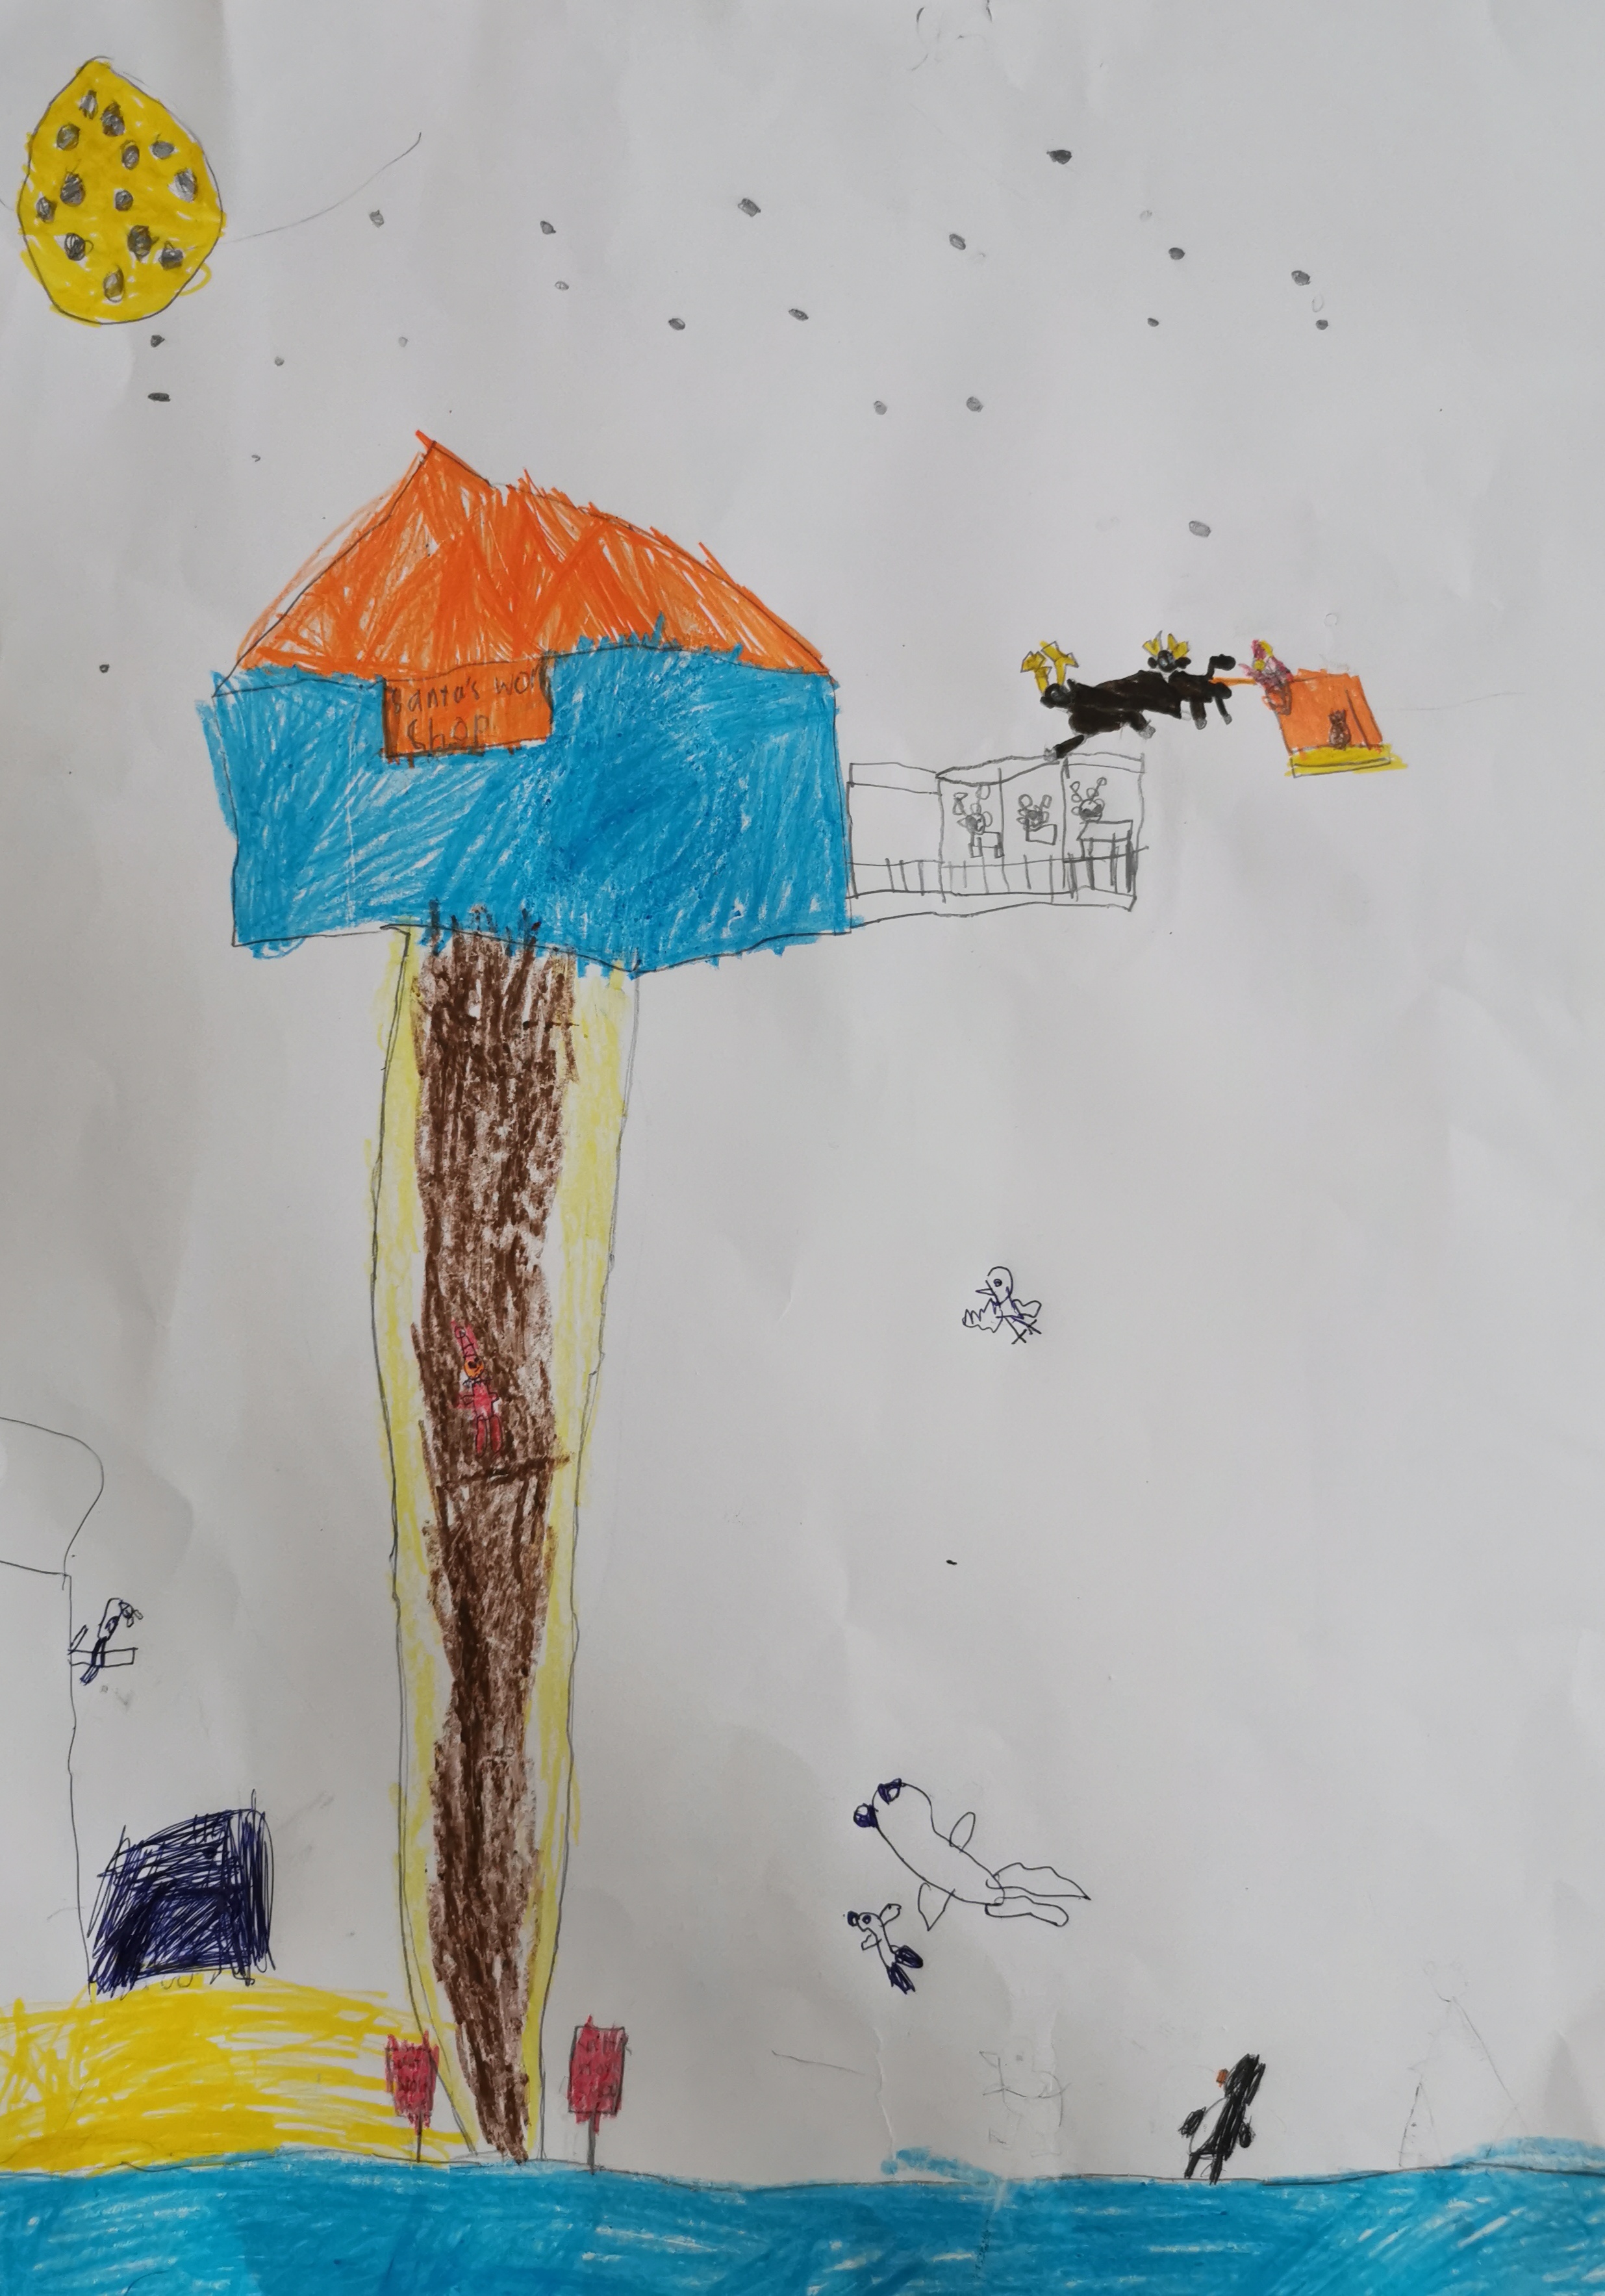 'The North Pole' by Jenny (5) from Leitrim